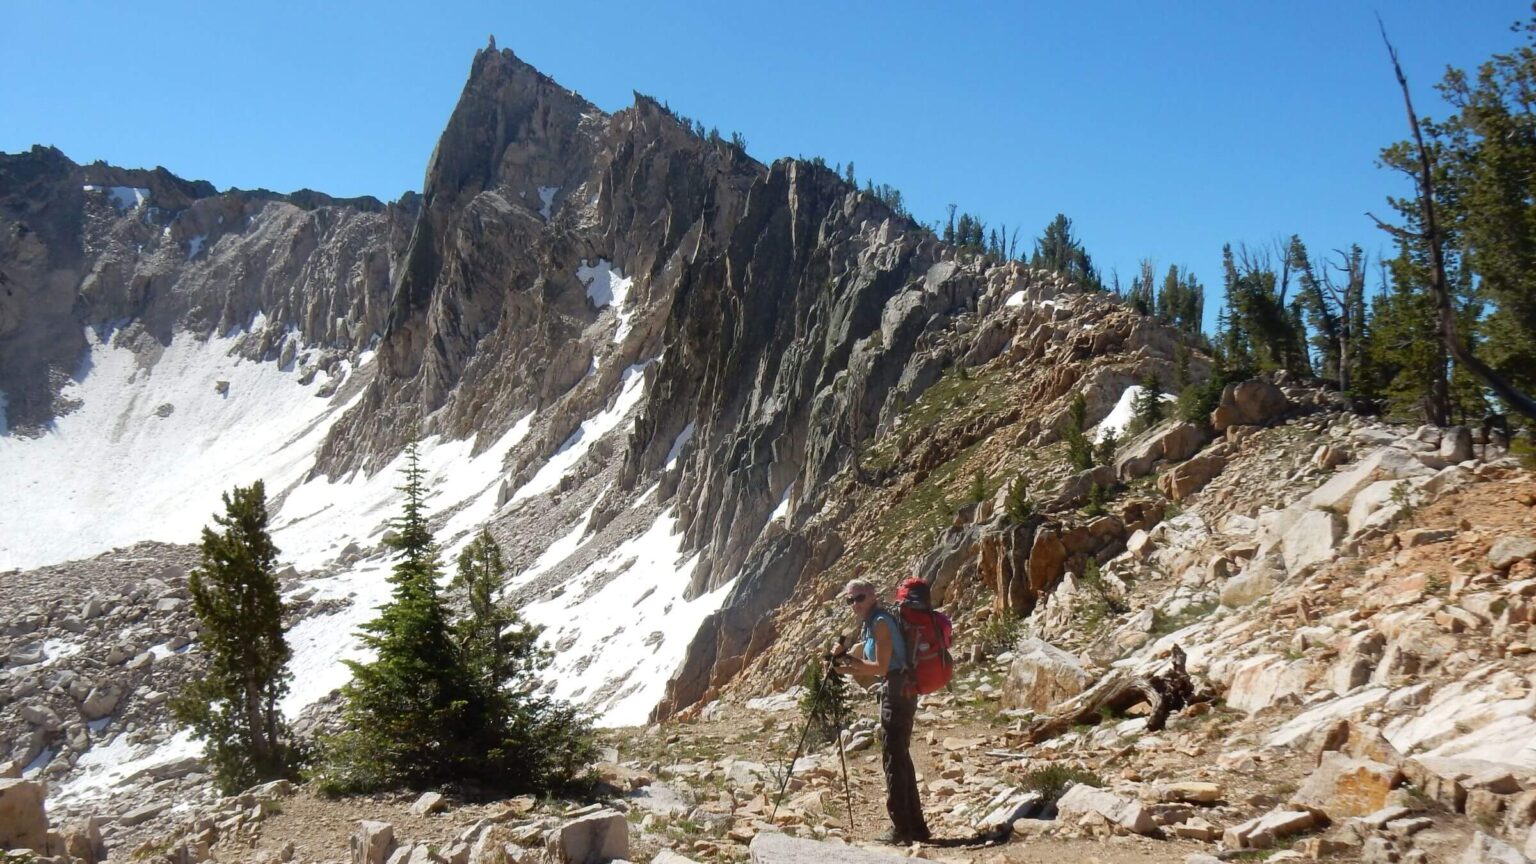 Sawtooth Wilderness, pass below The Temple, July